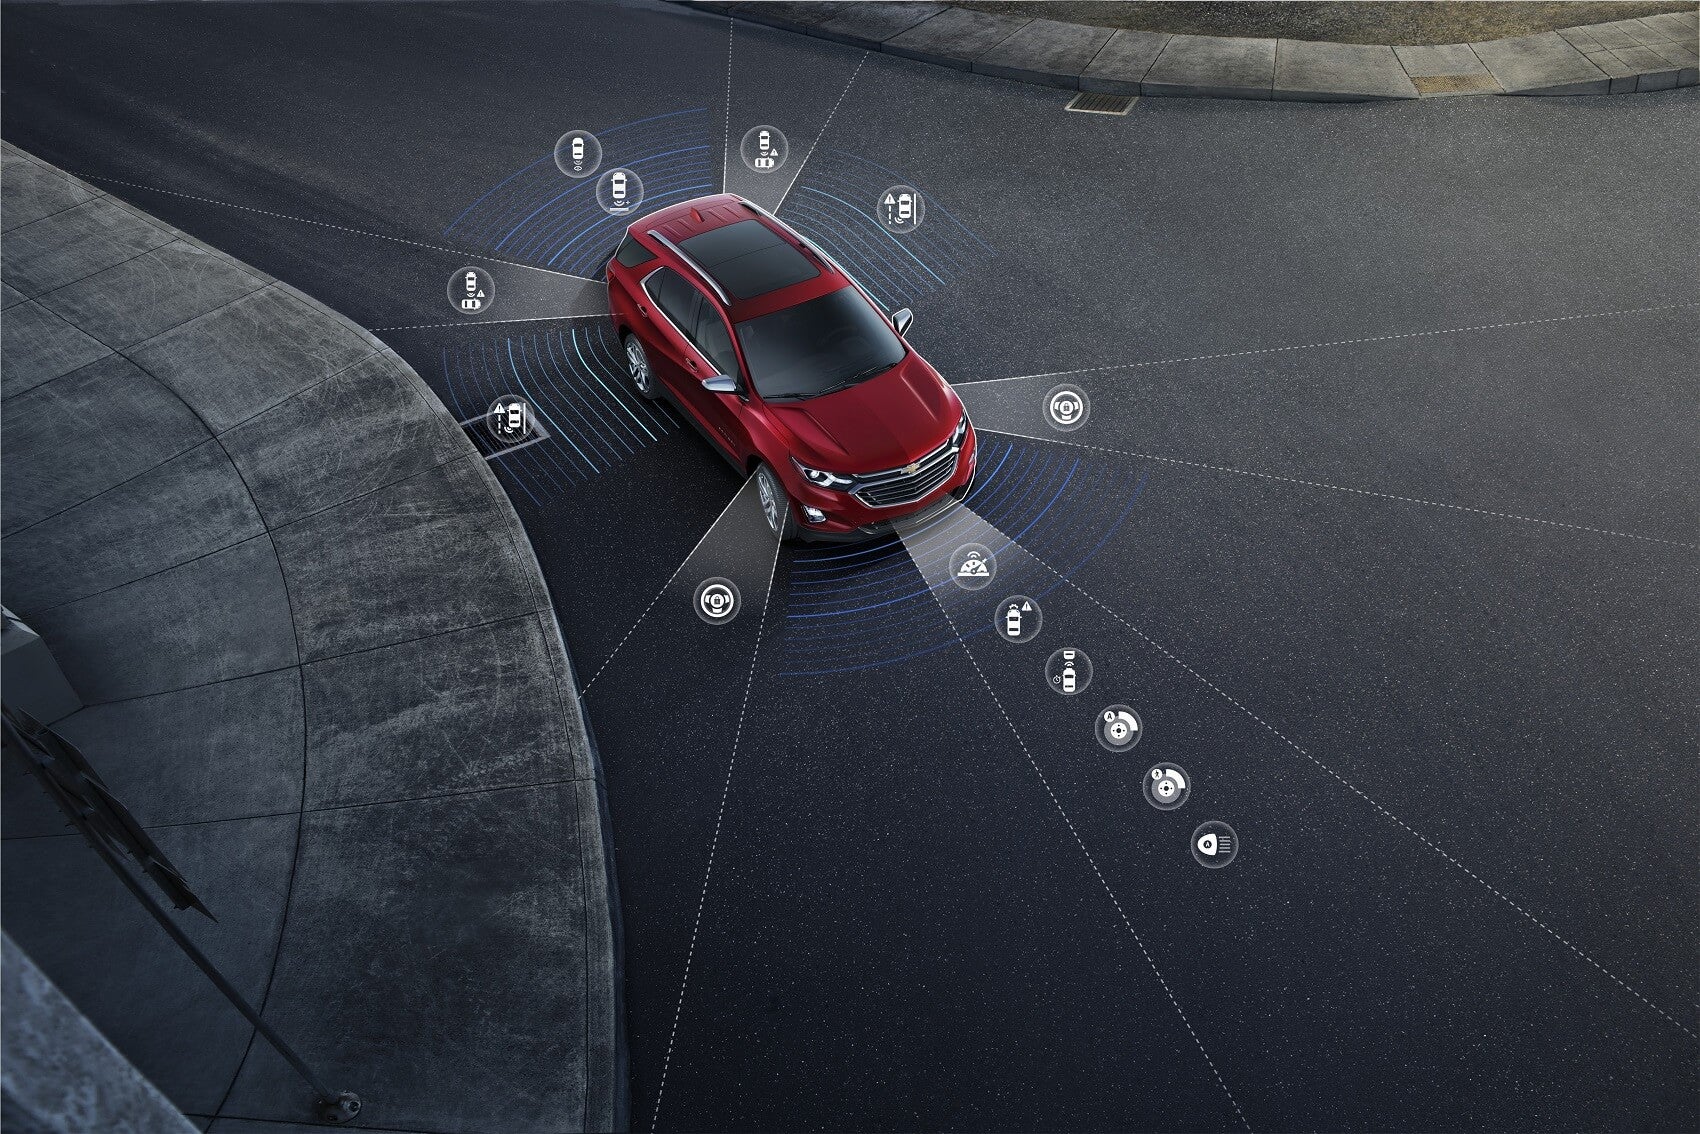 An infographic displays the placement of various technological features of the Chevy Equinox, a Chevy Equinox is parked near a curb